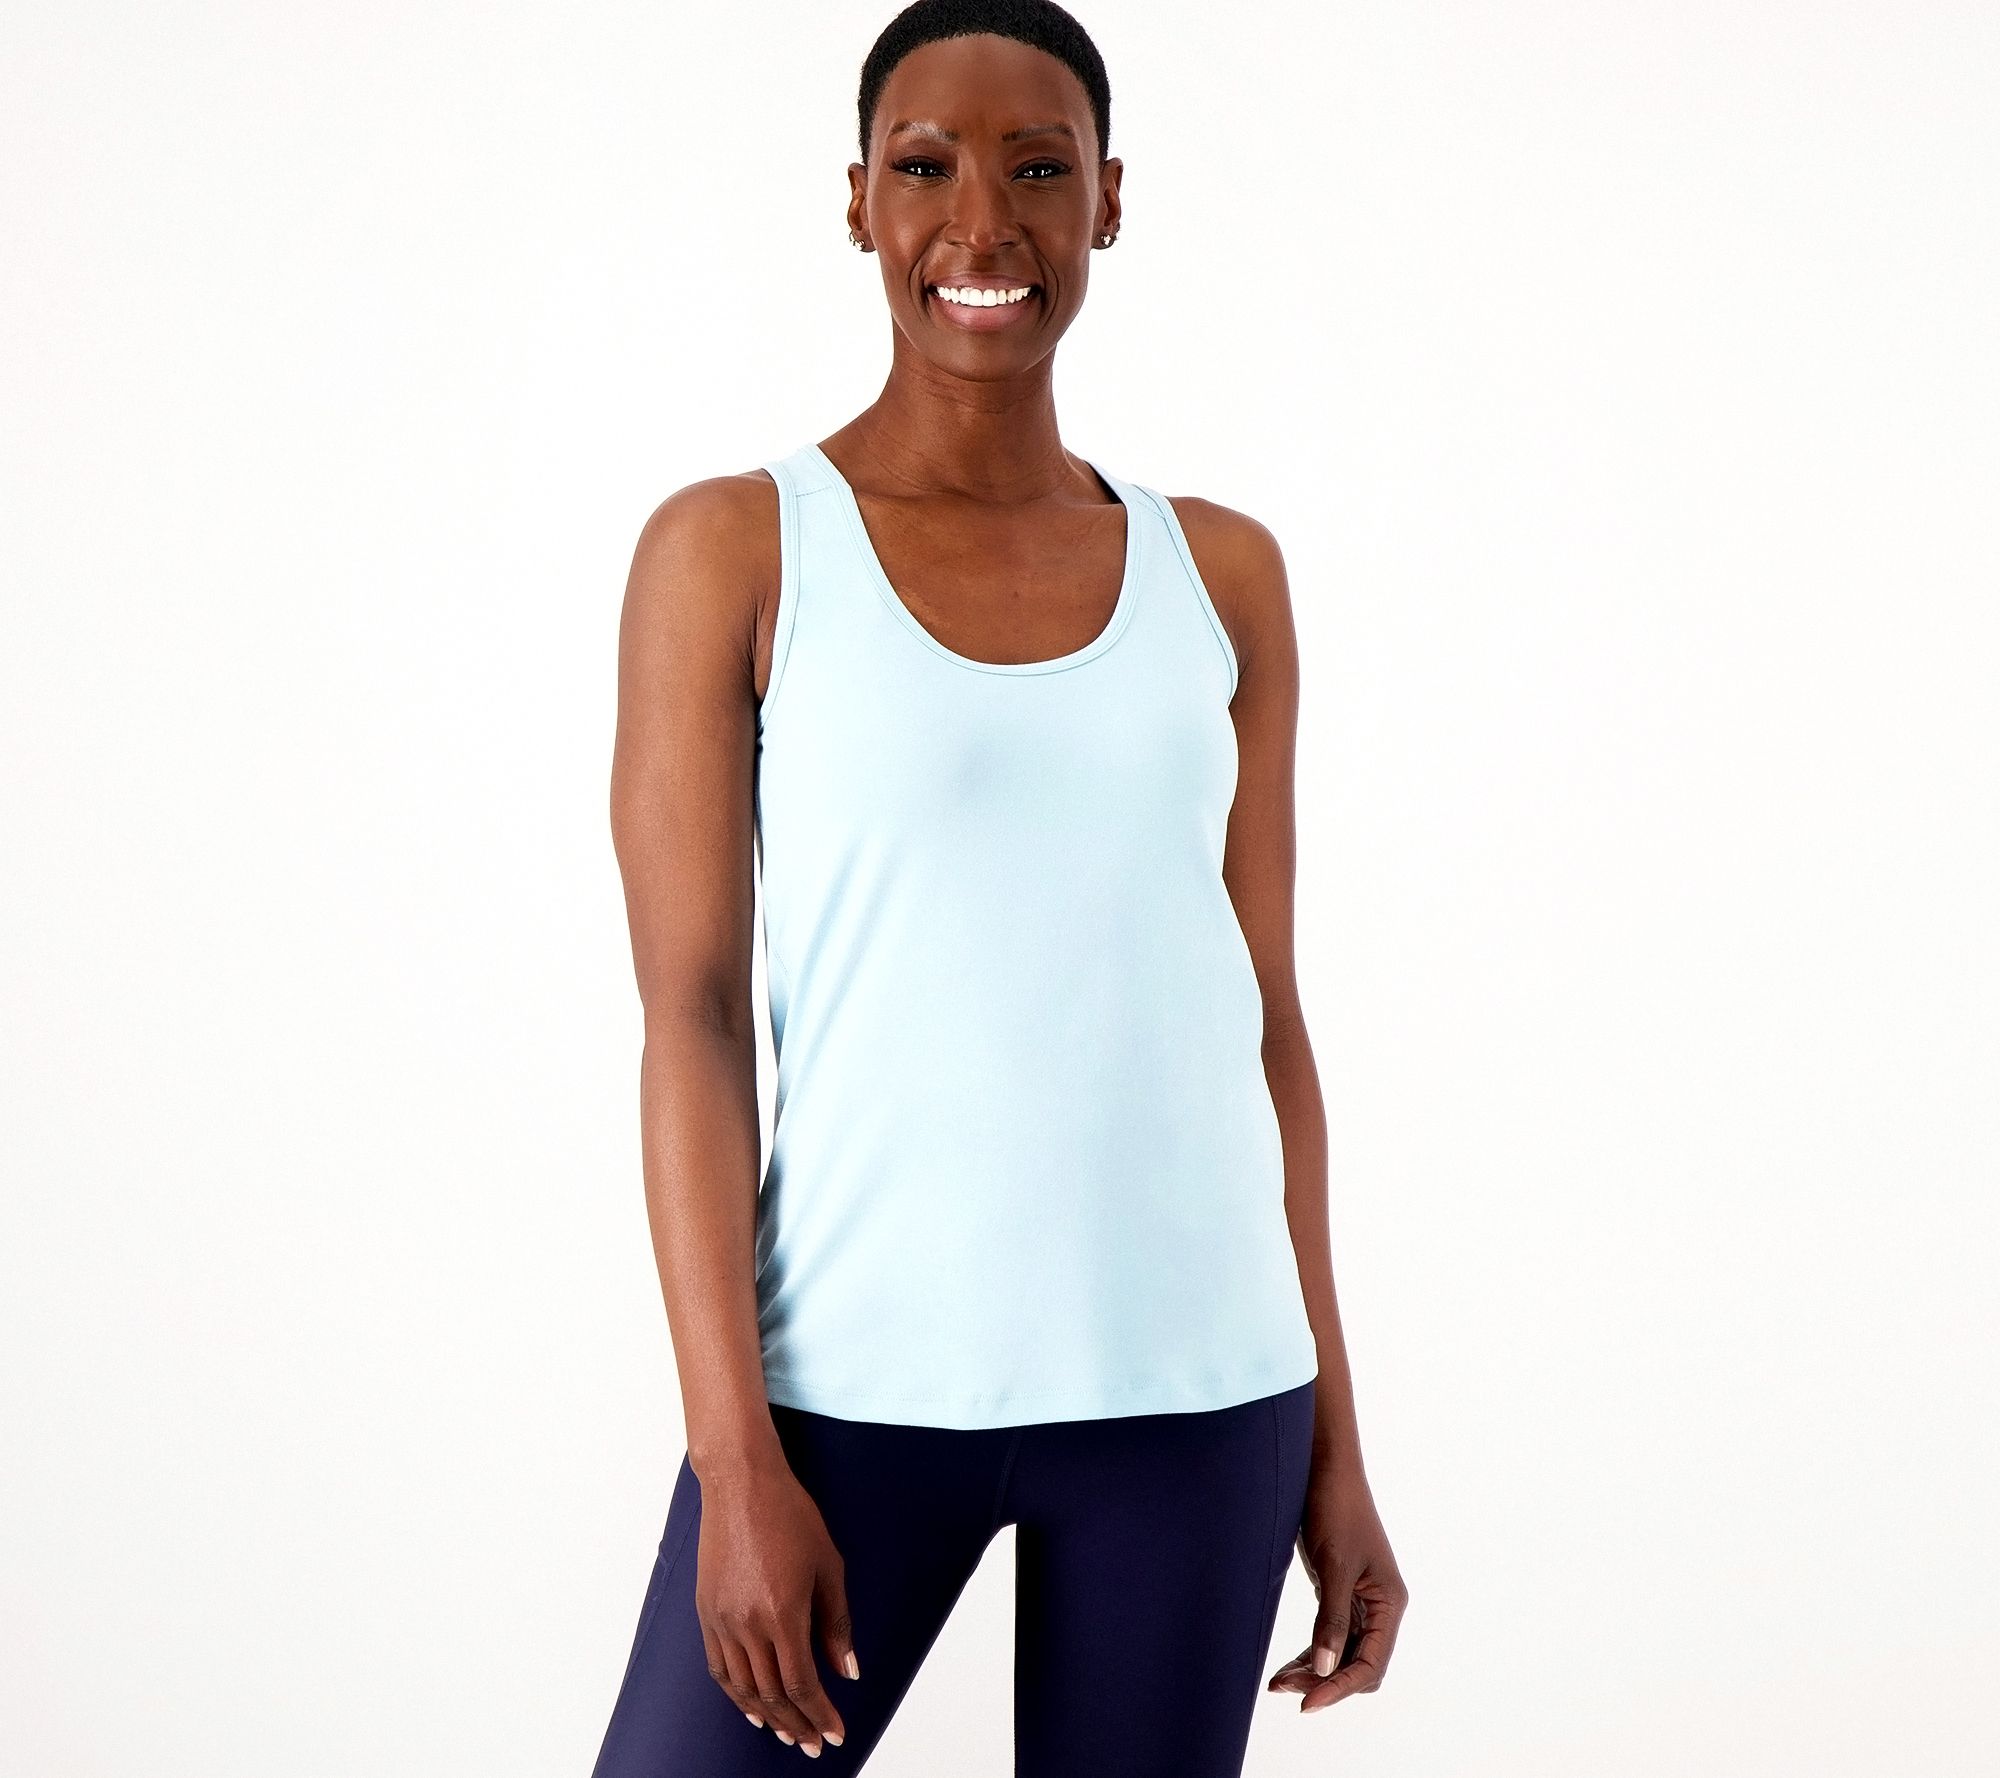 Addison Bay Just Launched a Chic Activewear Collection at QVC